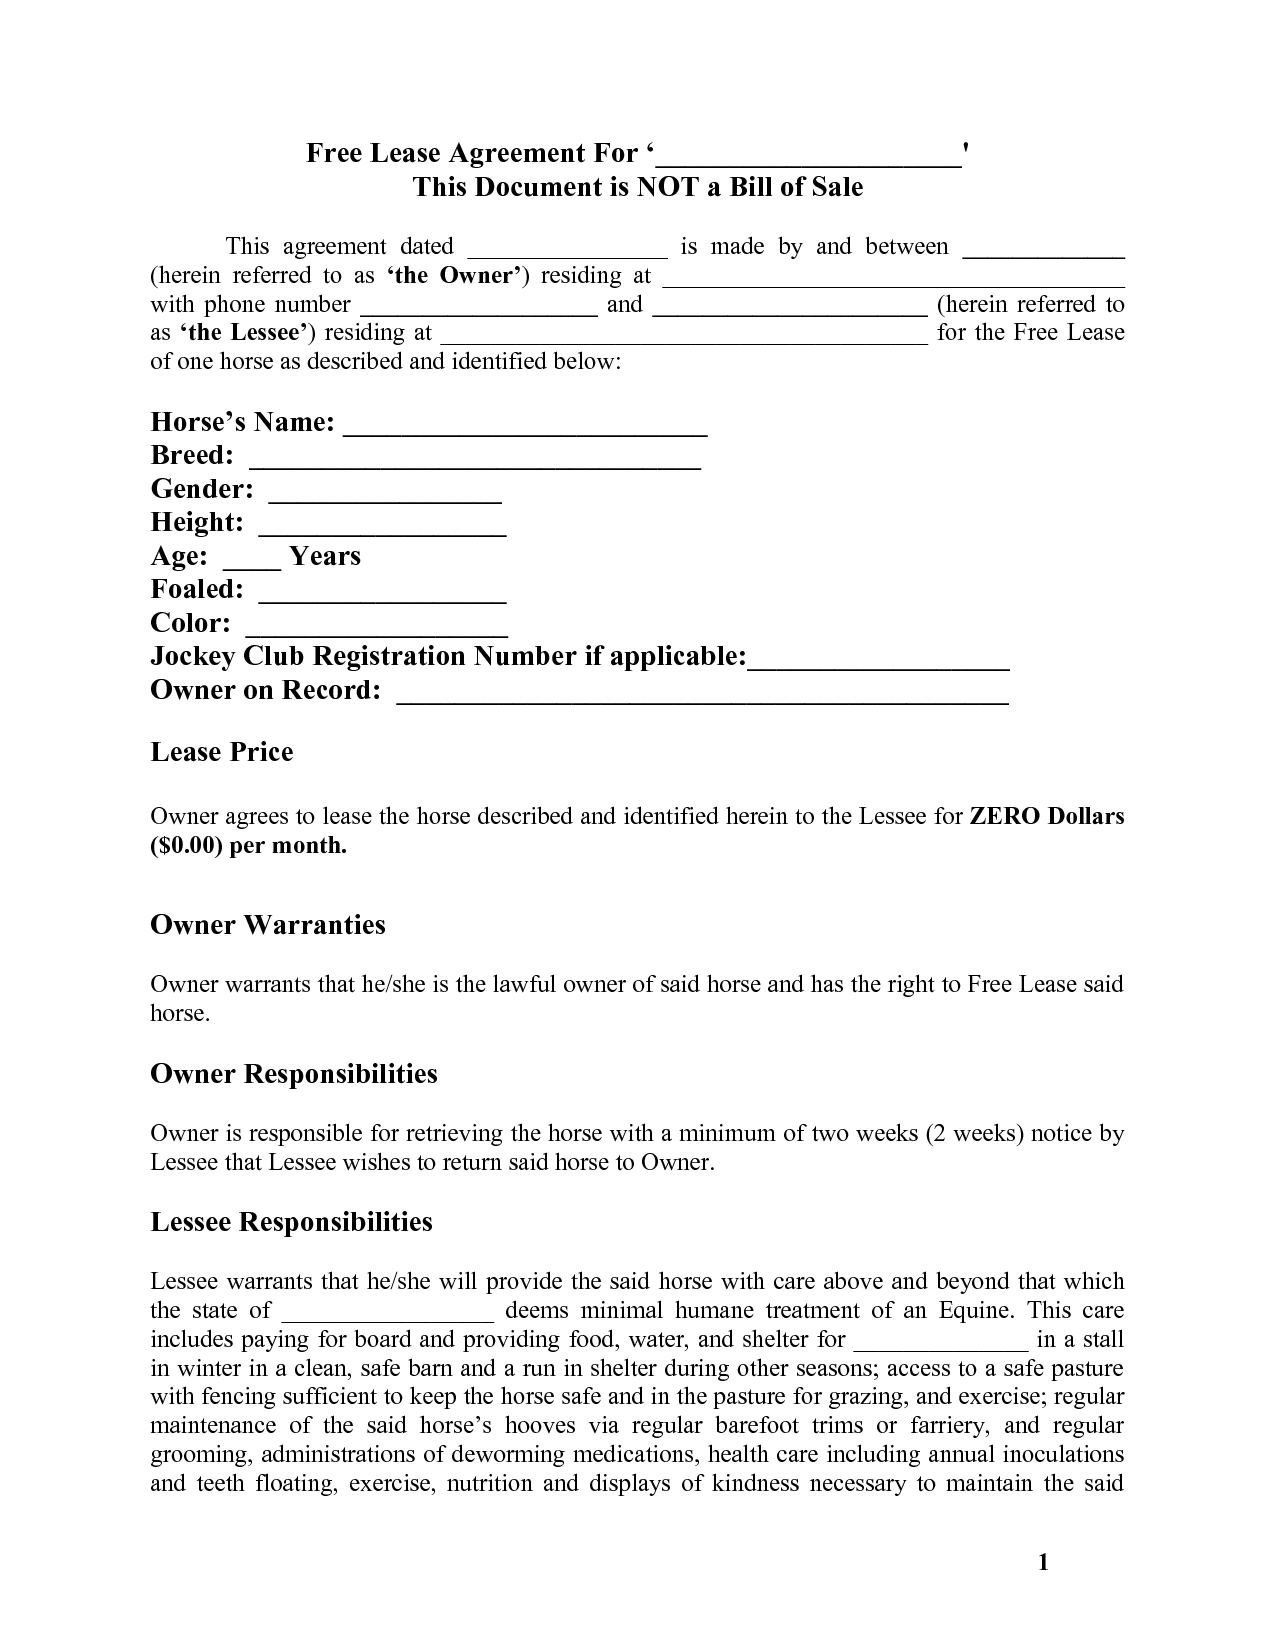 Equine Lease Agreement Fill Online, Printable, Fillable, Blank 